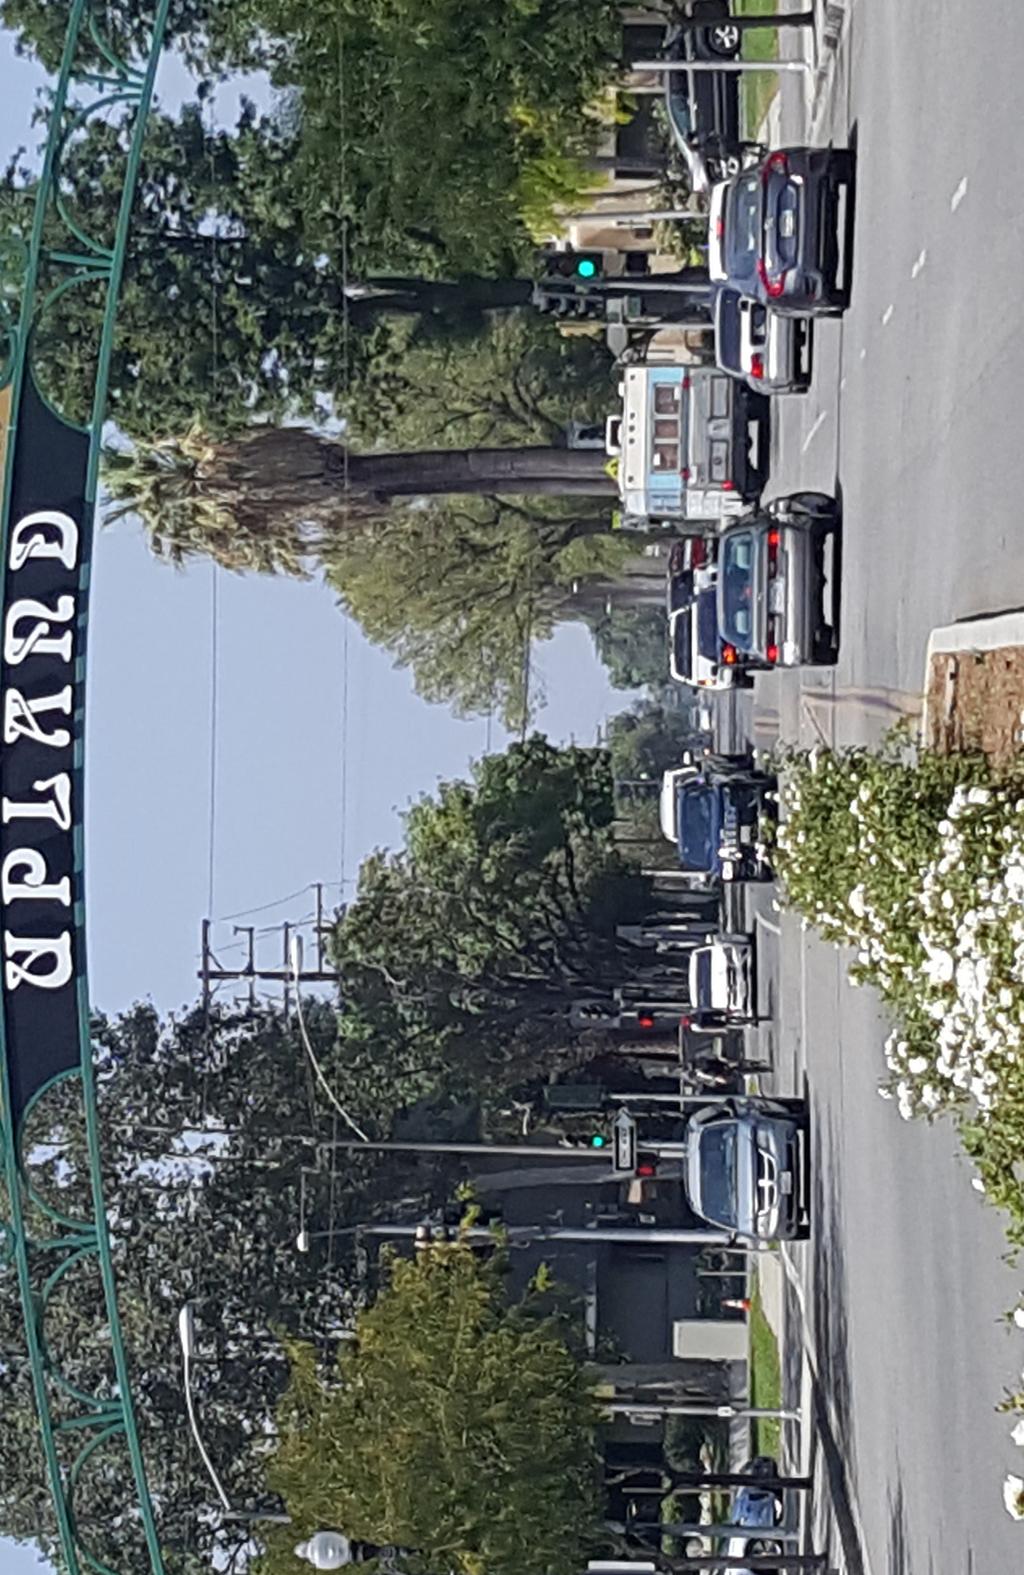 UPLAND, CALIFORNIA Previously named North Ontario, the City of Upland is ideally located between Ontario and Rancho Cucamonga, two of the largest cities in San Bernardino County.